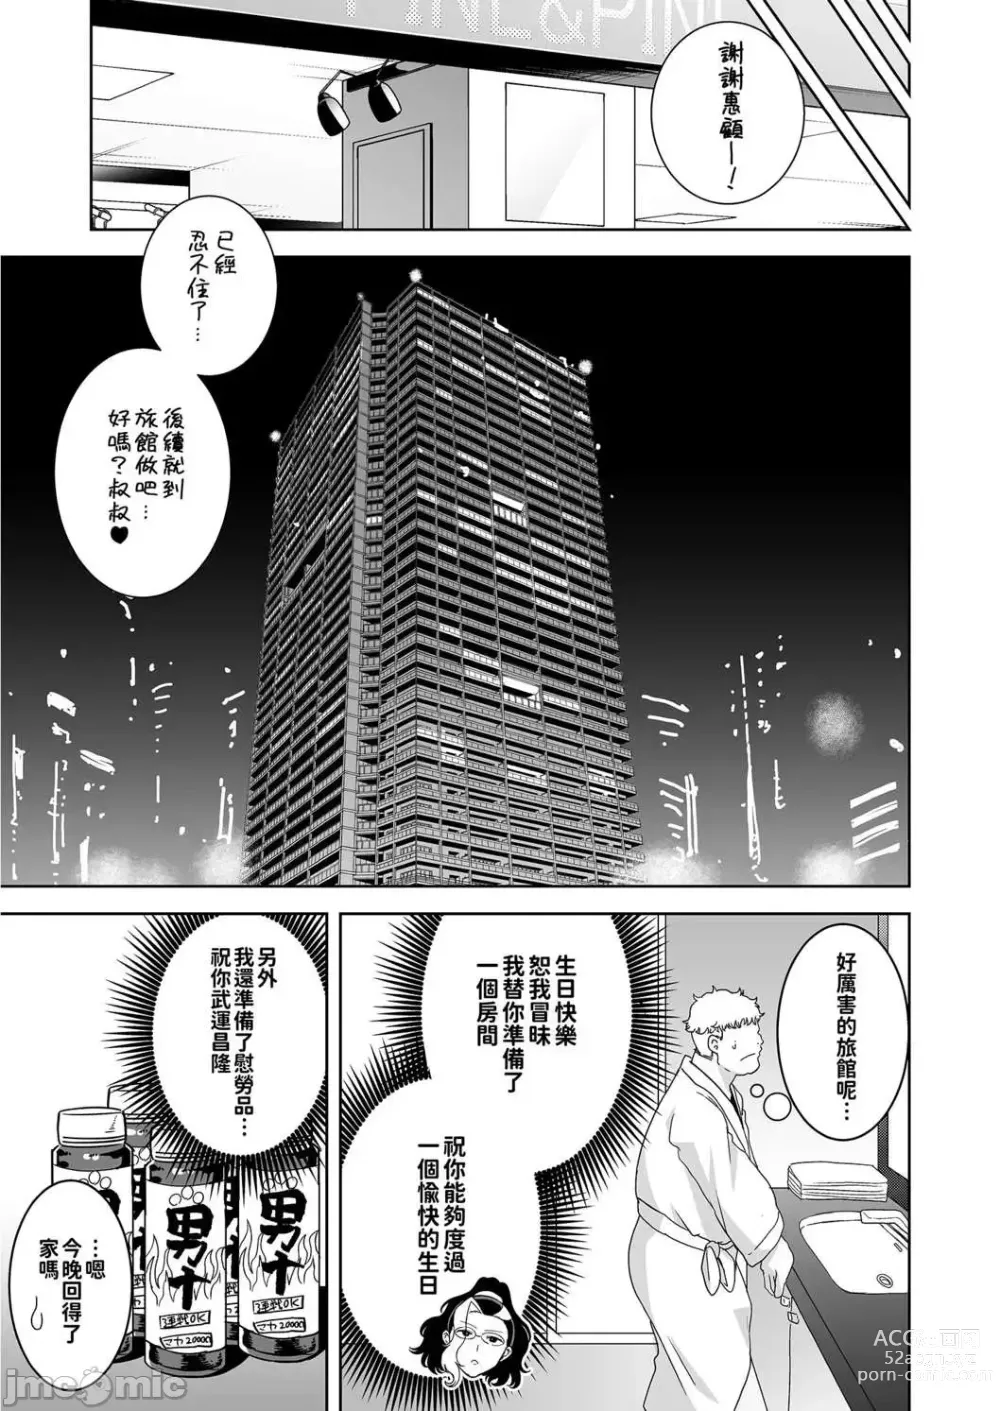 Page 75 of doujinshi Seika Girls Academys Officially Approved Prostitute Man 1 + 2 + 3